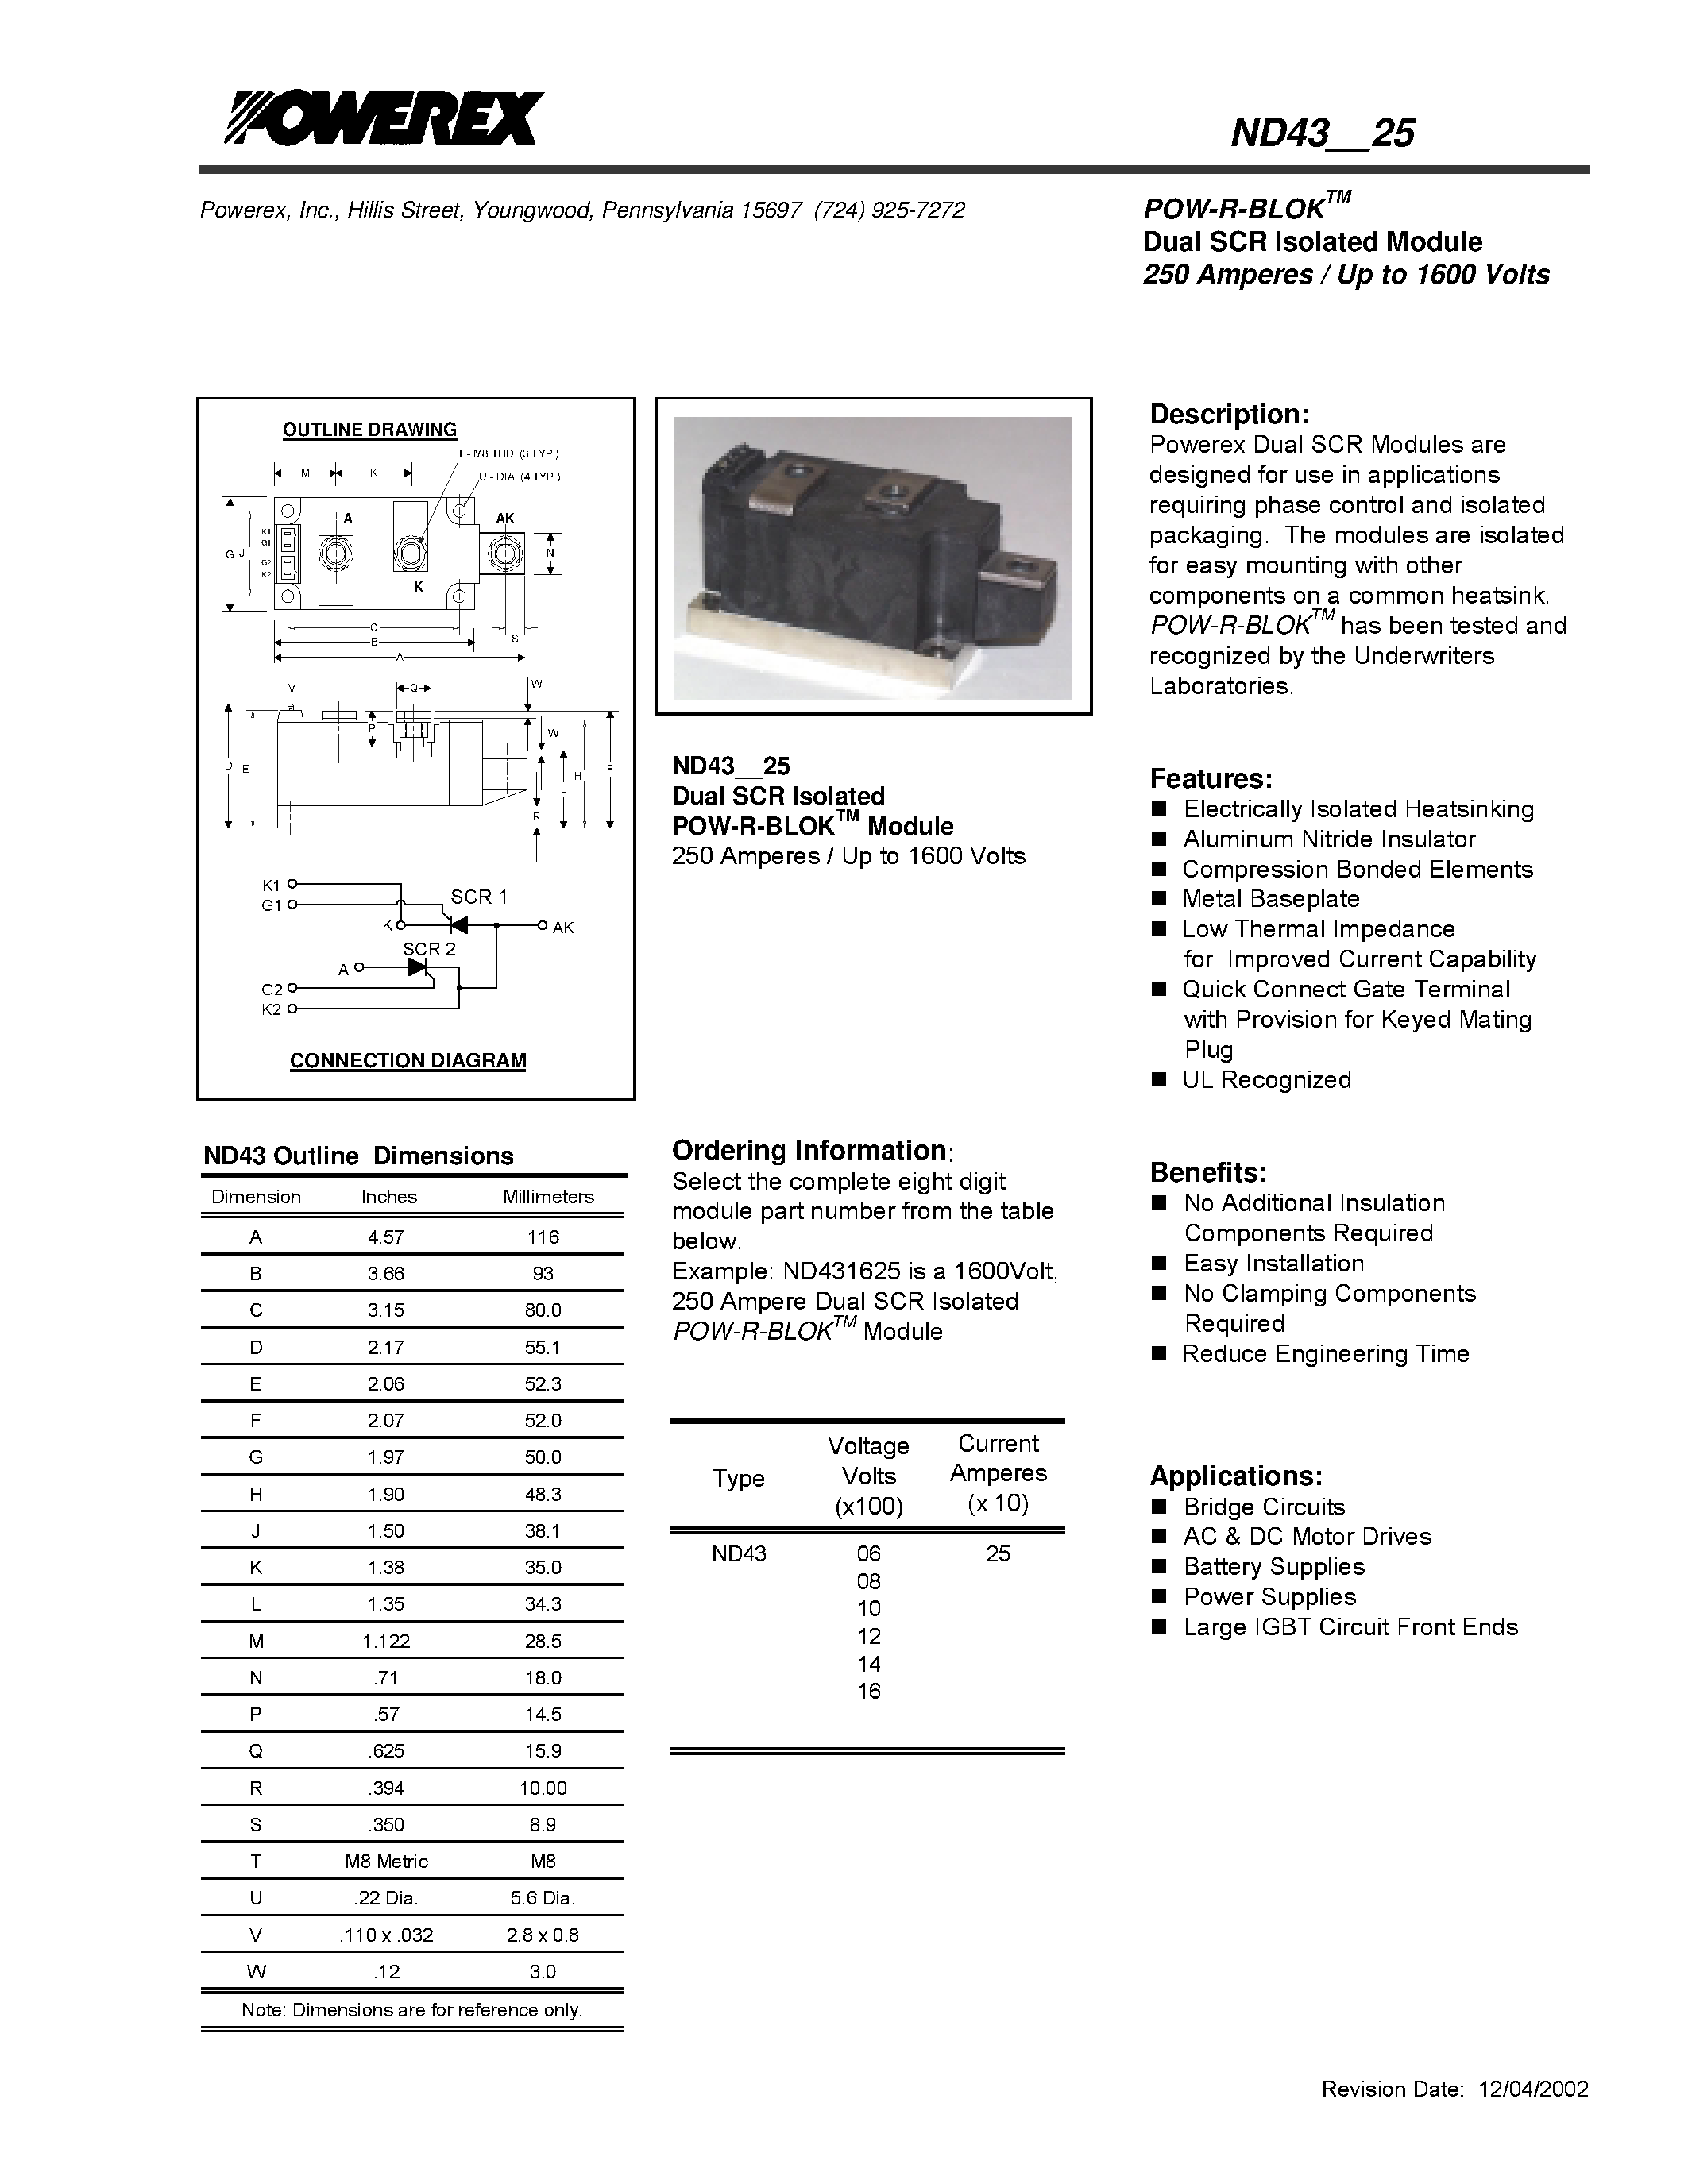 Datasheet ND431025 - POW-R-BLOK Dual SCR Isolated Module (250 Amperes / Up to 1600 Volts) page 1